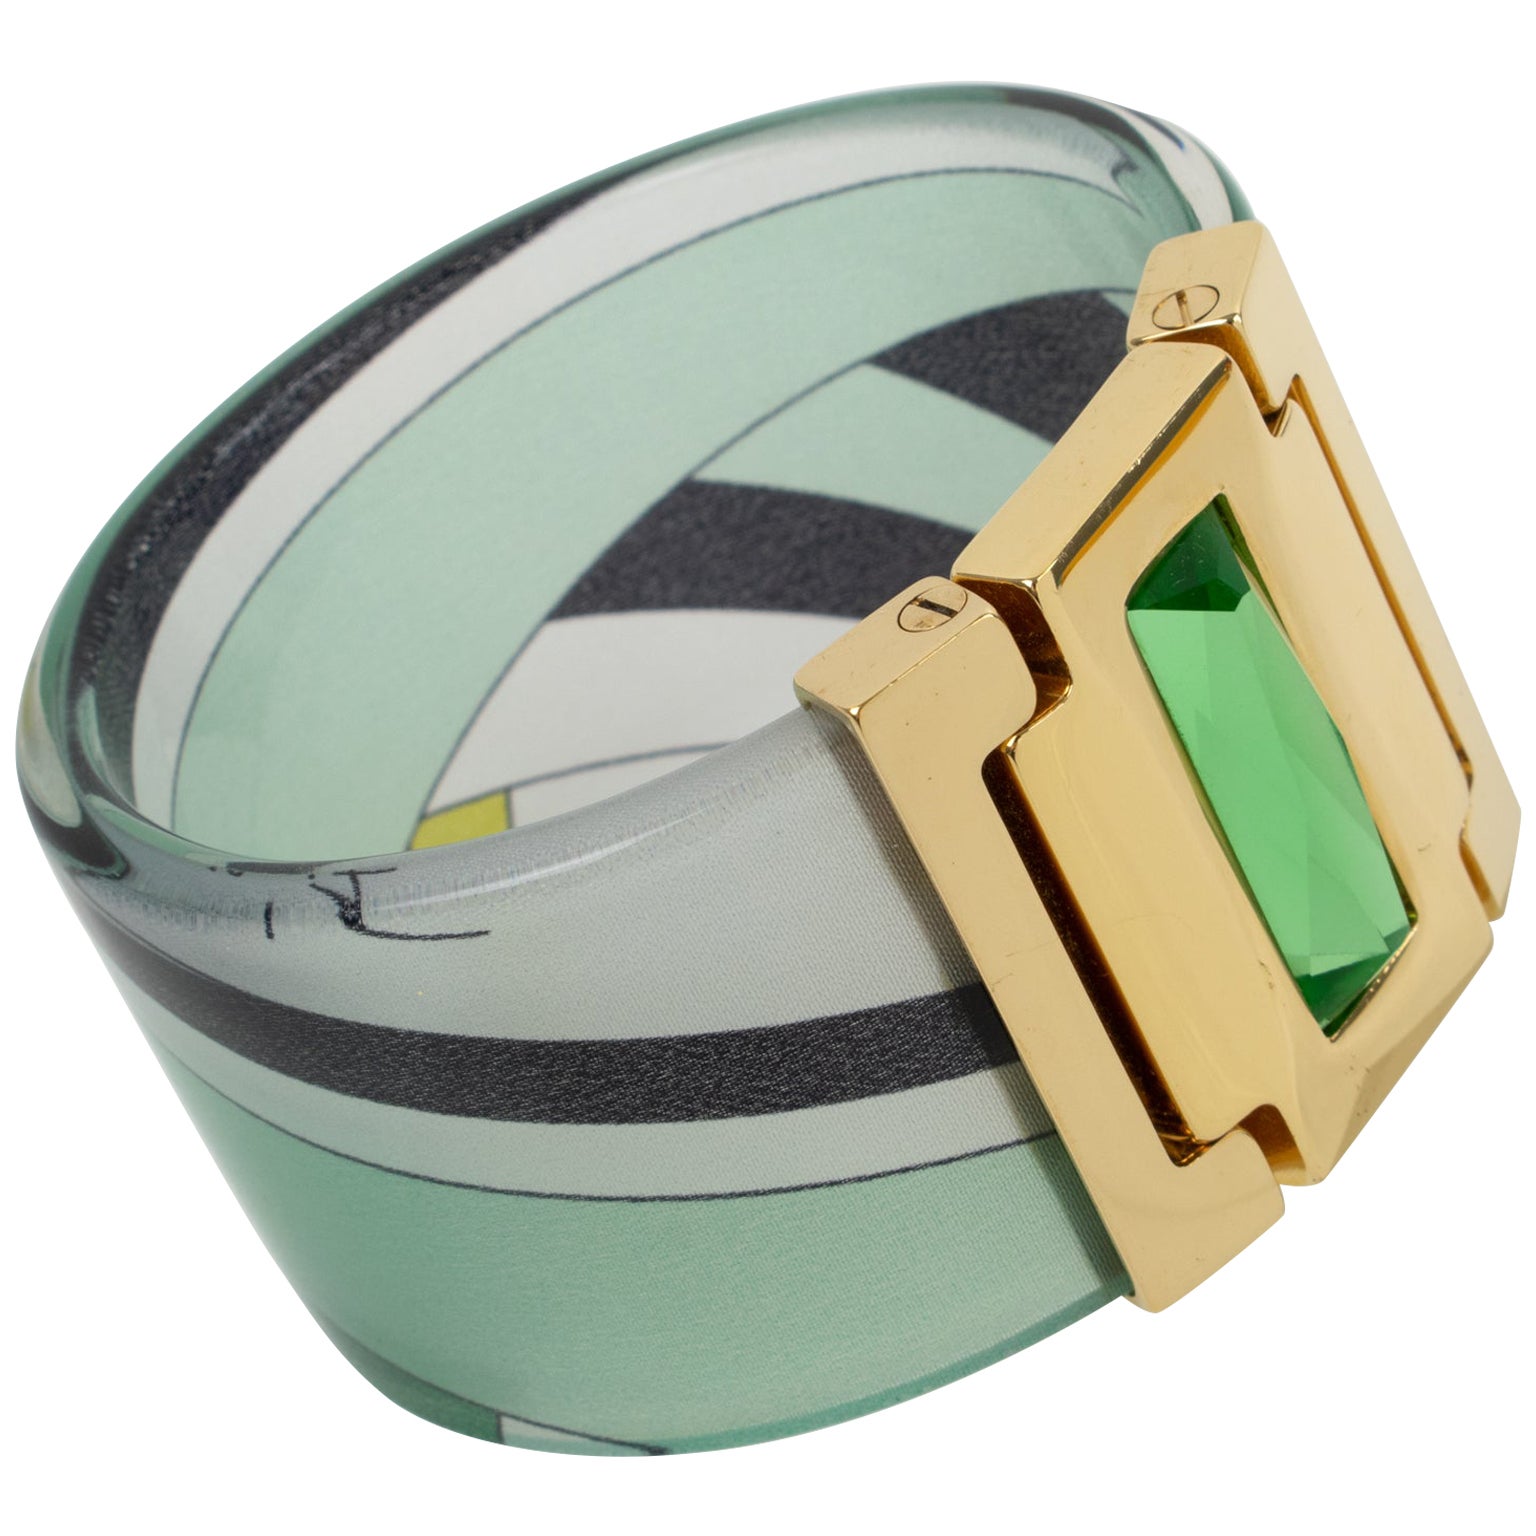 Emilio Pucci Jeweled Bracelet Bangle Lucite with Green and Black Silk Inclusion For Sale